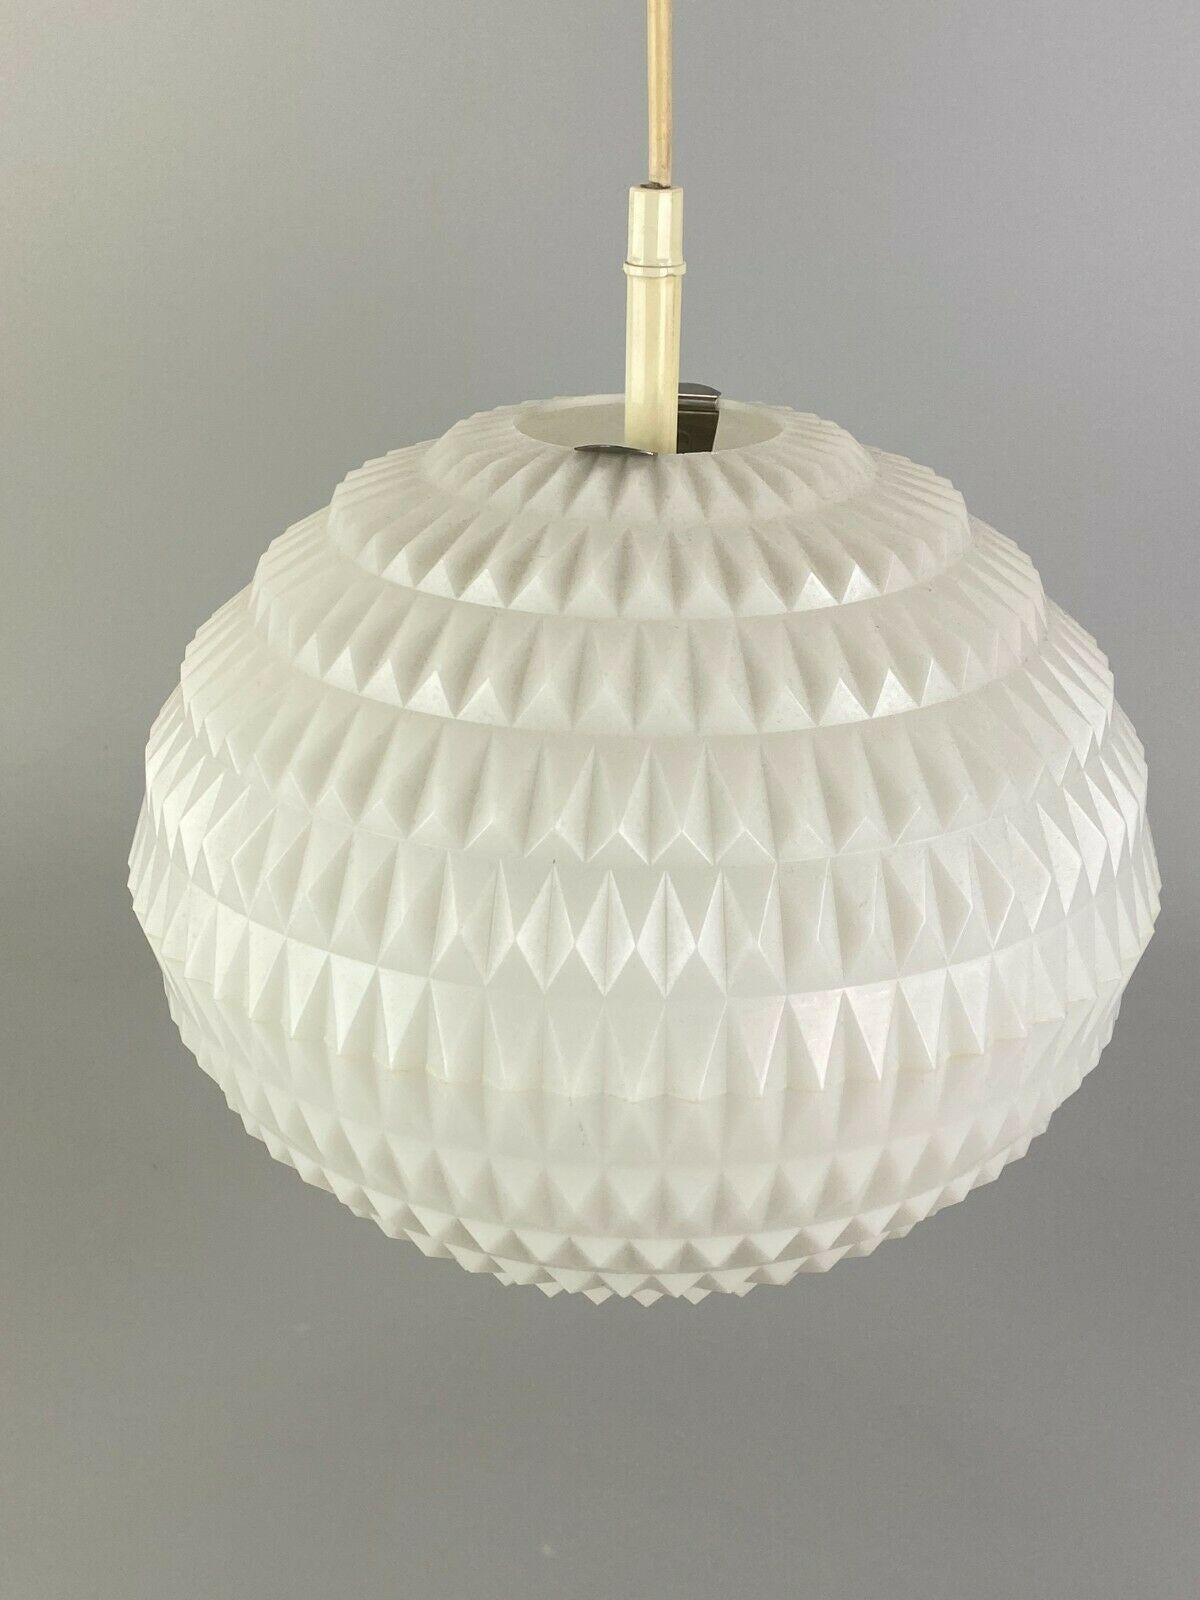 German 60s 70s Erco Lamp Light Honeycomb Ceiling Lamp Plastic Space Age Design For Sale